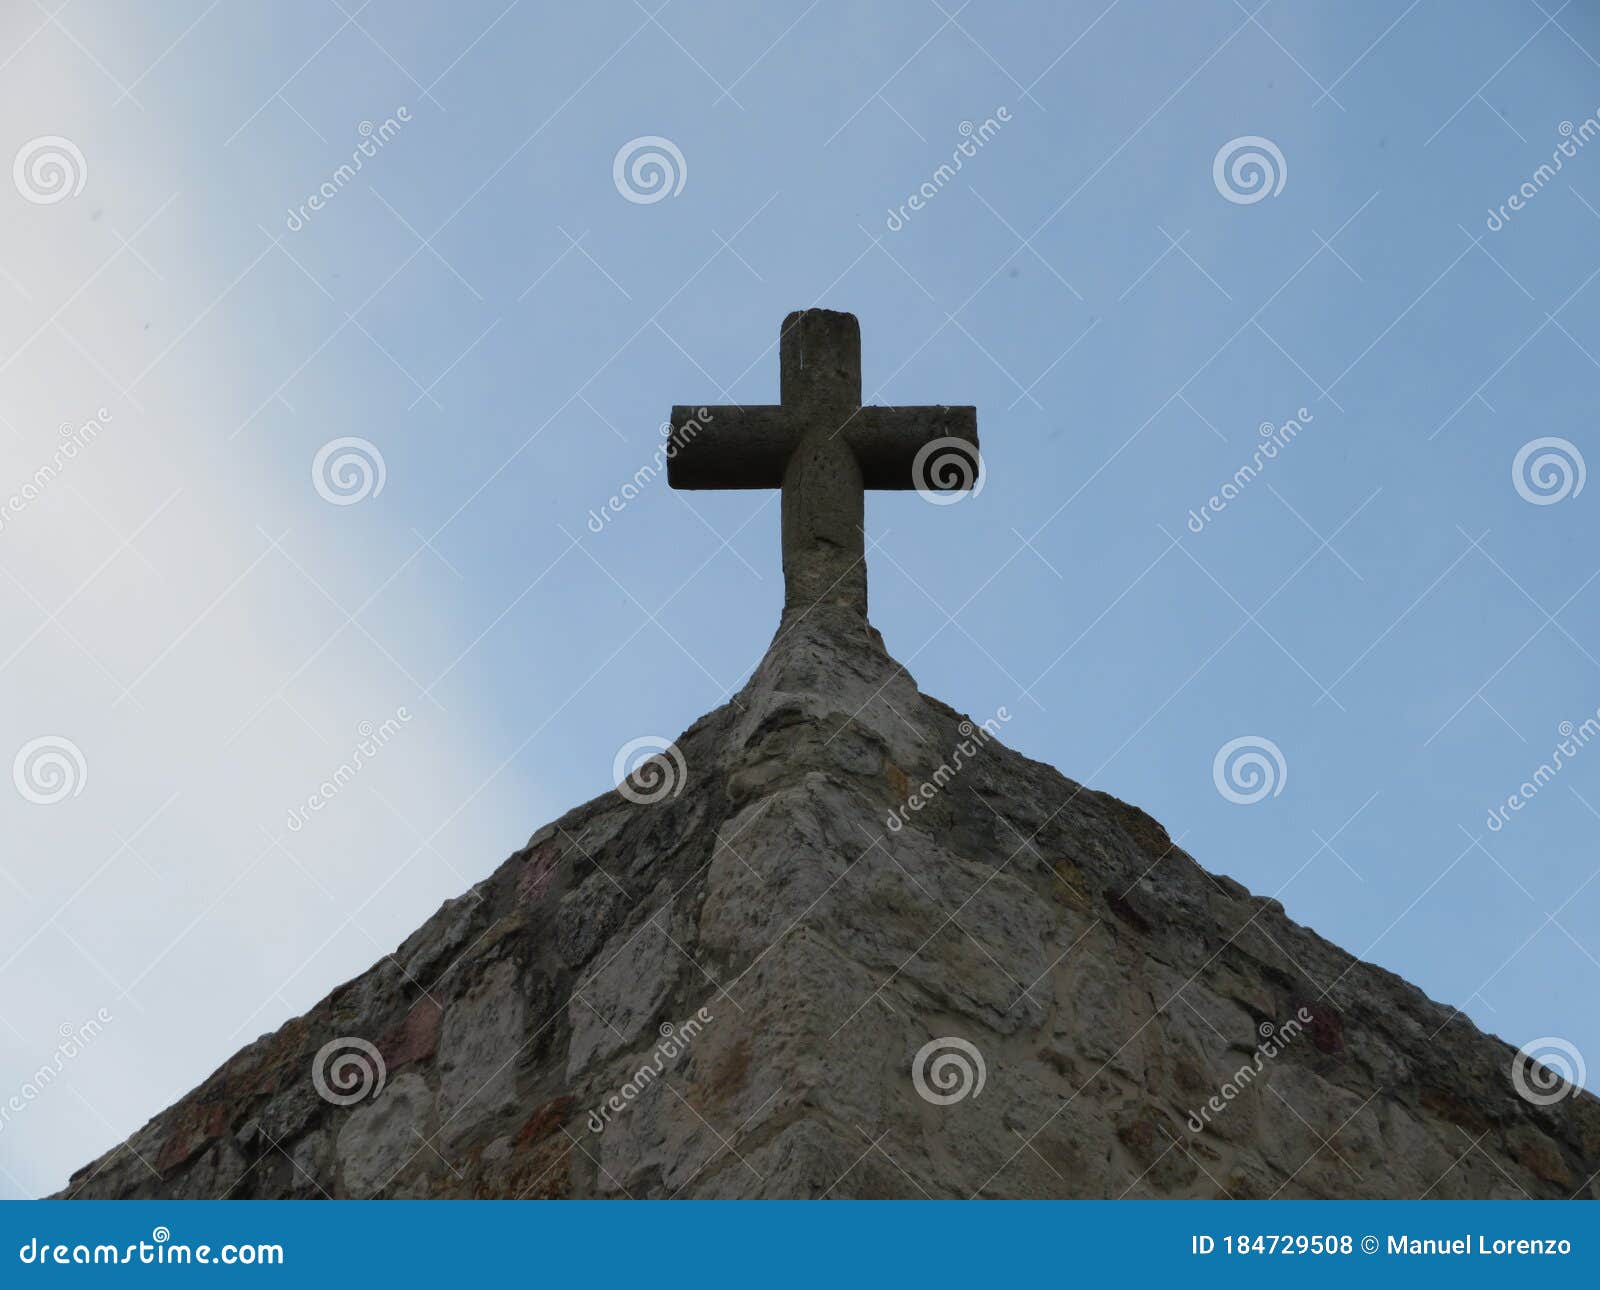 cross christianity religion stone ancient building 